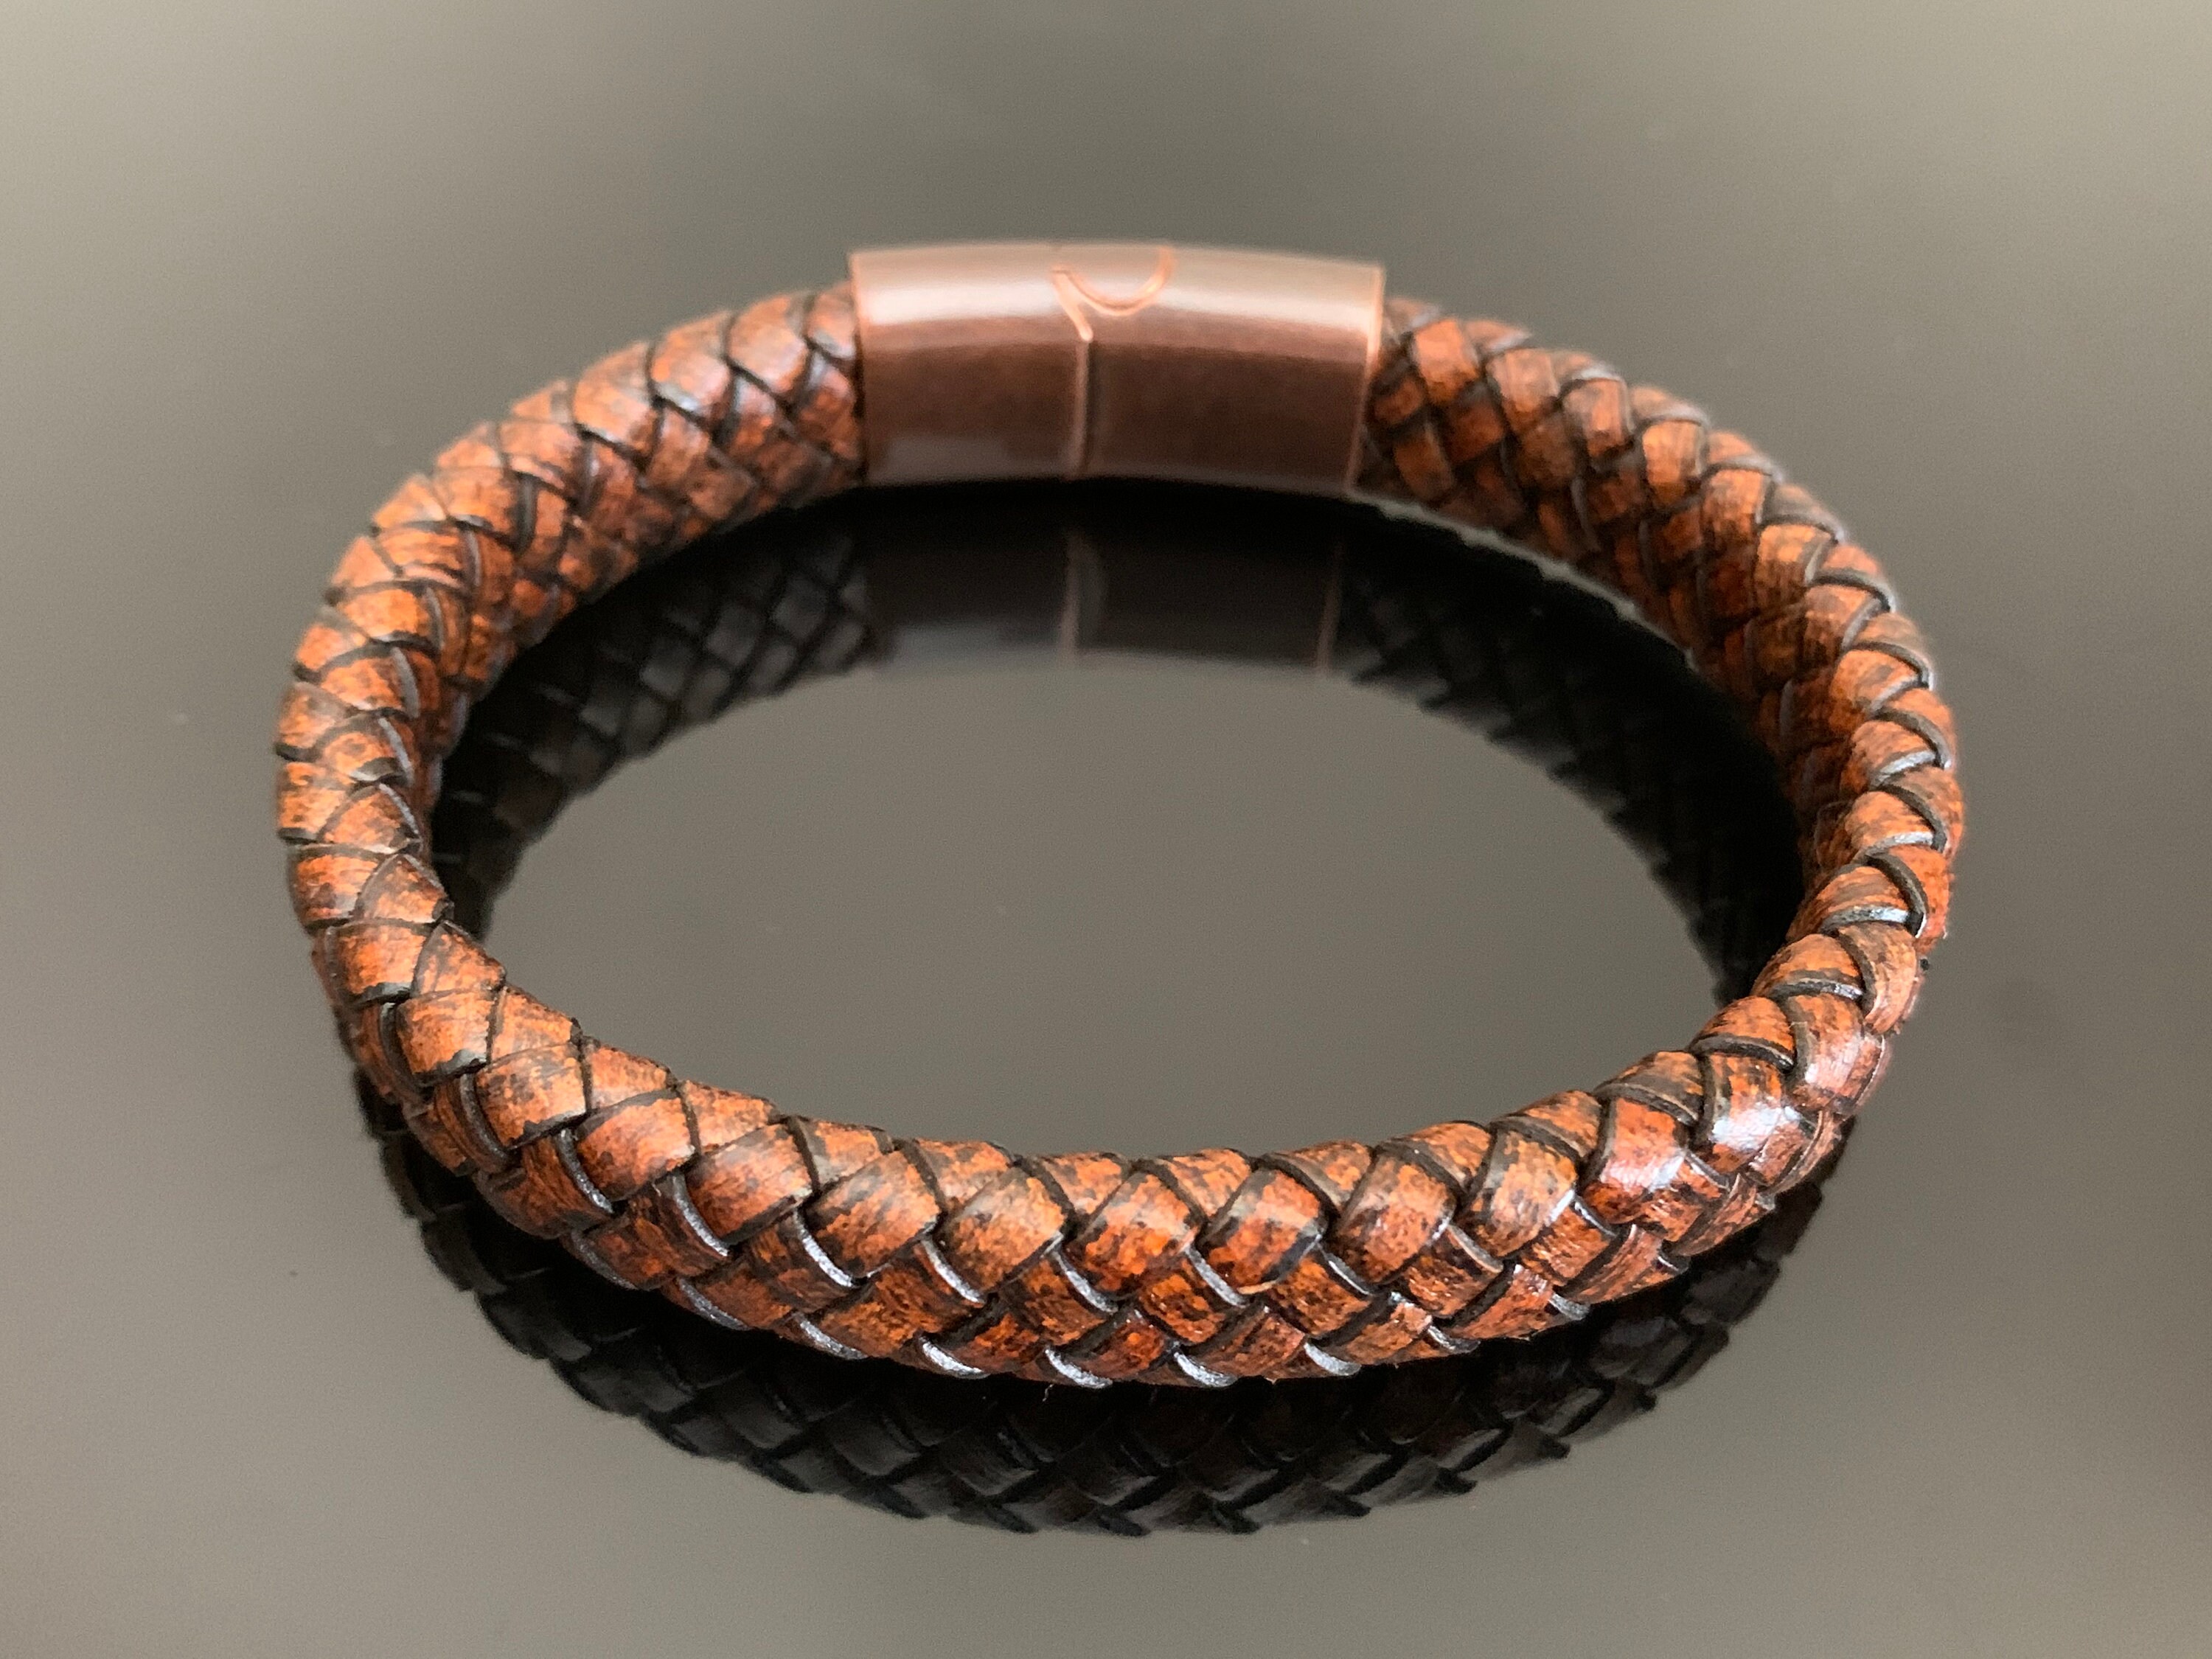 11mm Flat Woven Italian Leather Steel Clasp Engravable Bracelet - Gift for Boyfriend 8.5 Inches / Brown